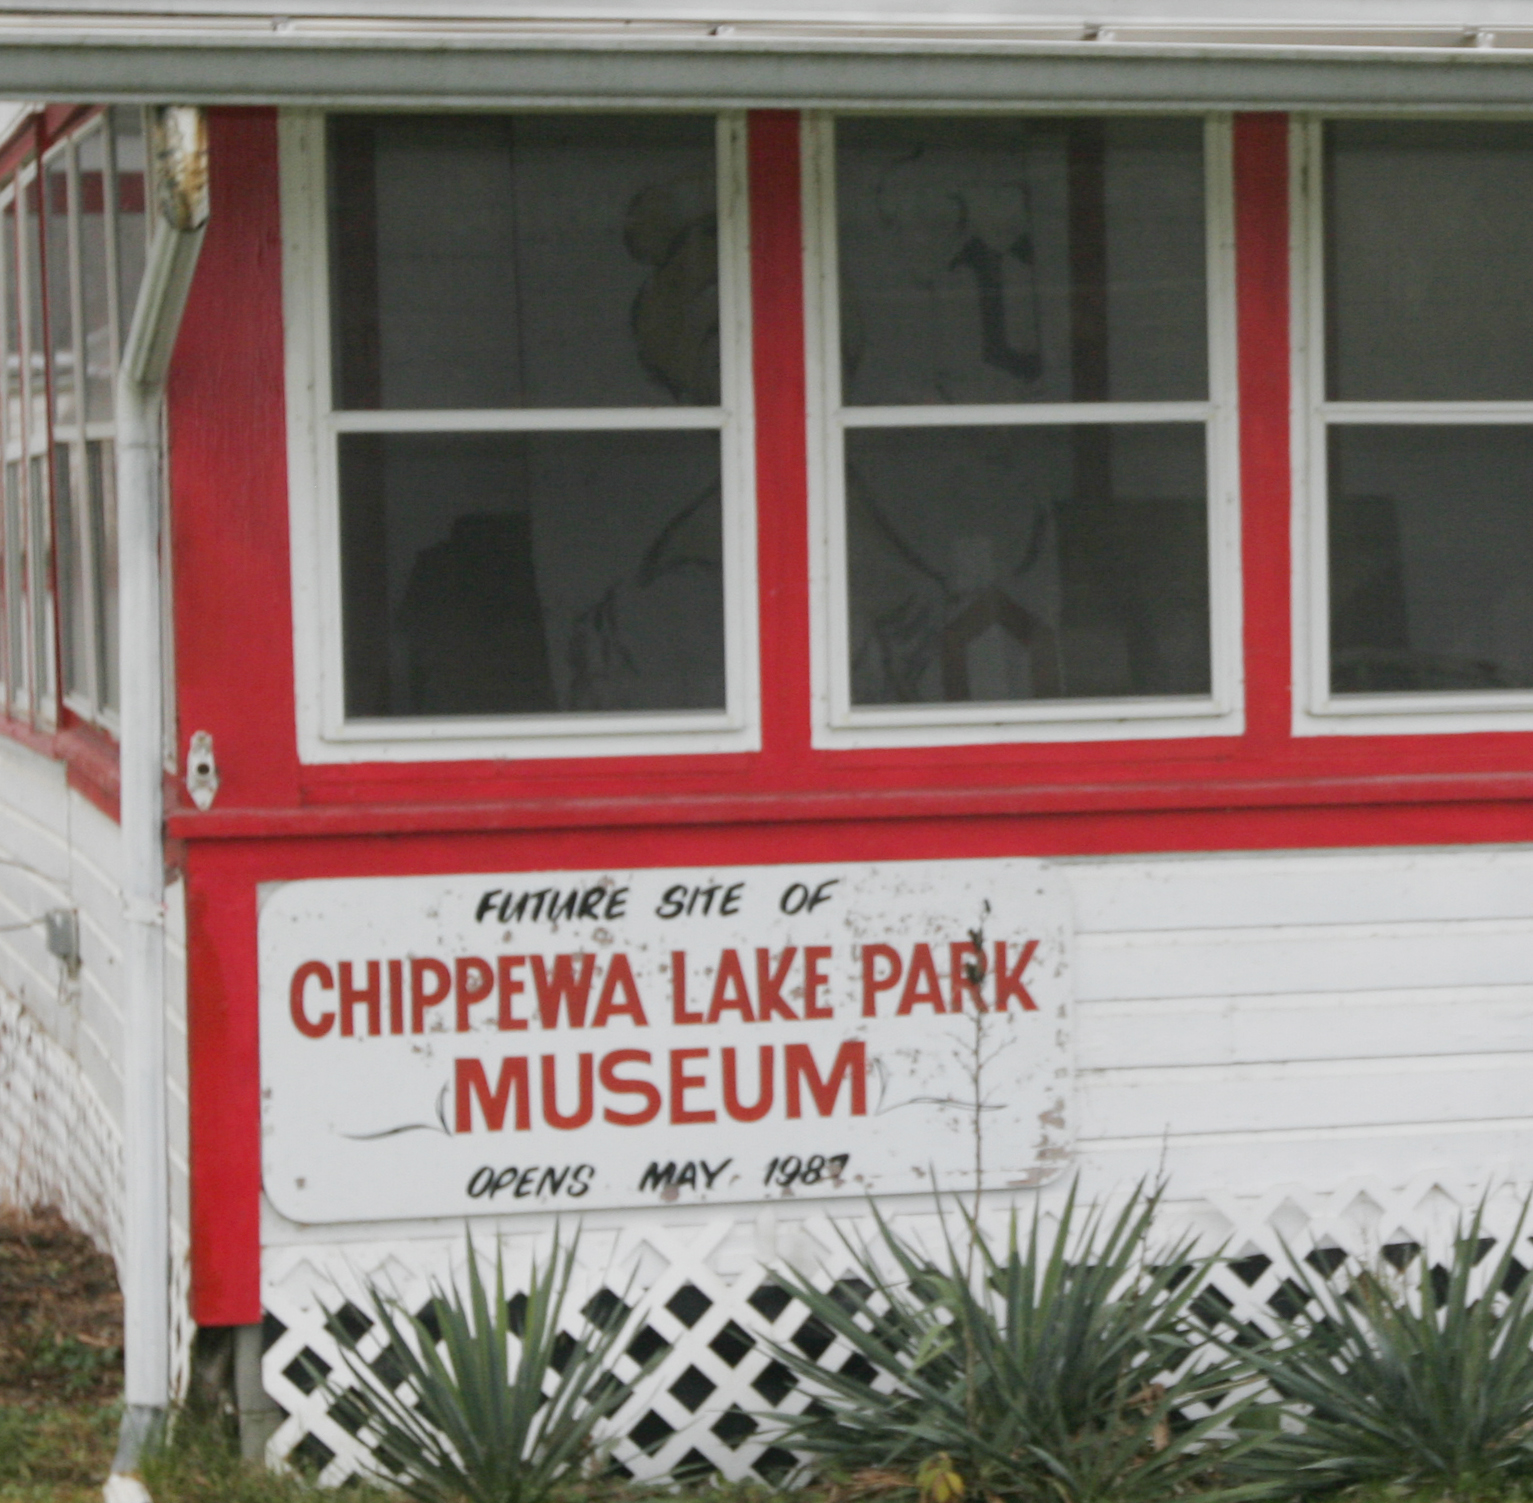 the sign is for chippewa lake park museum